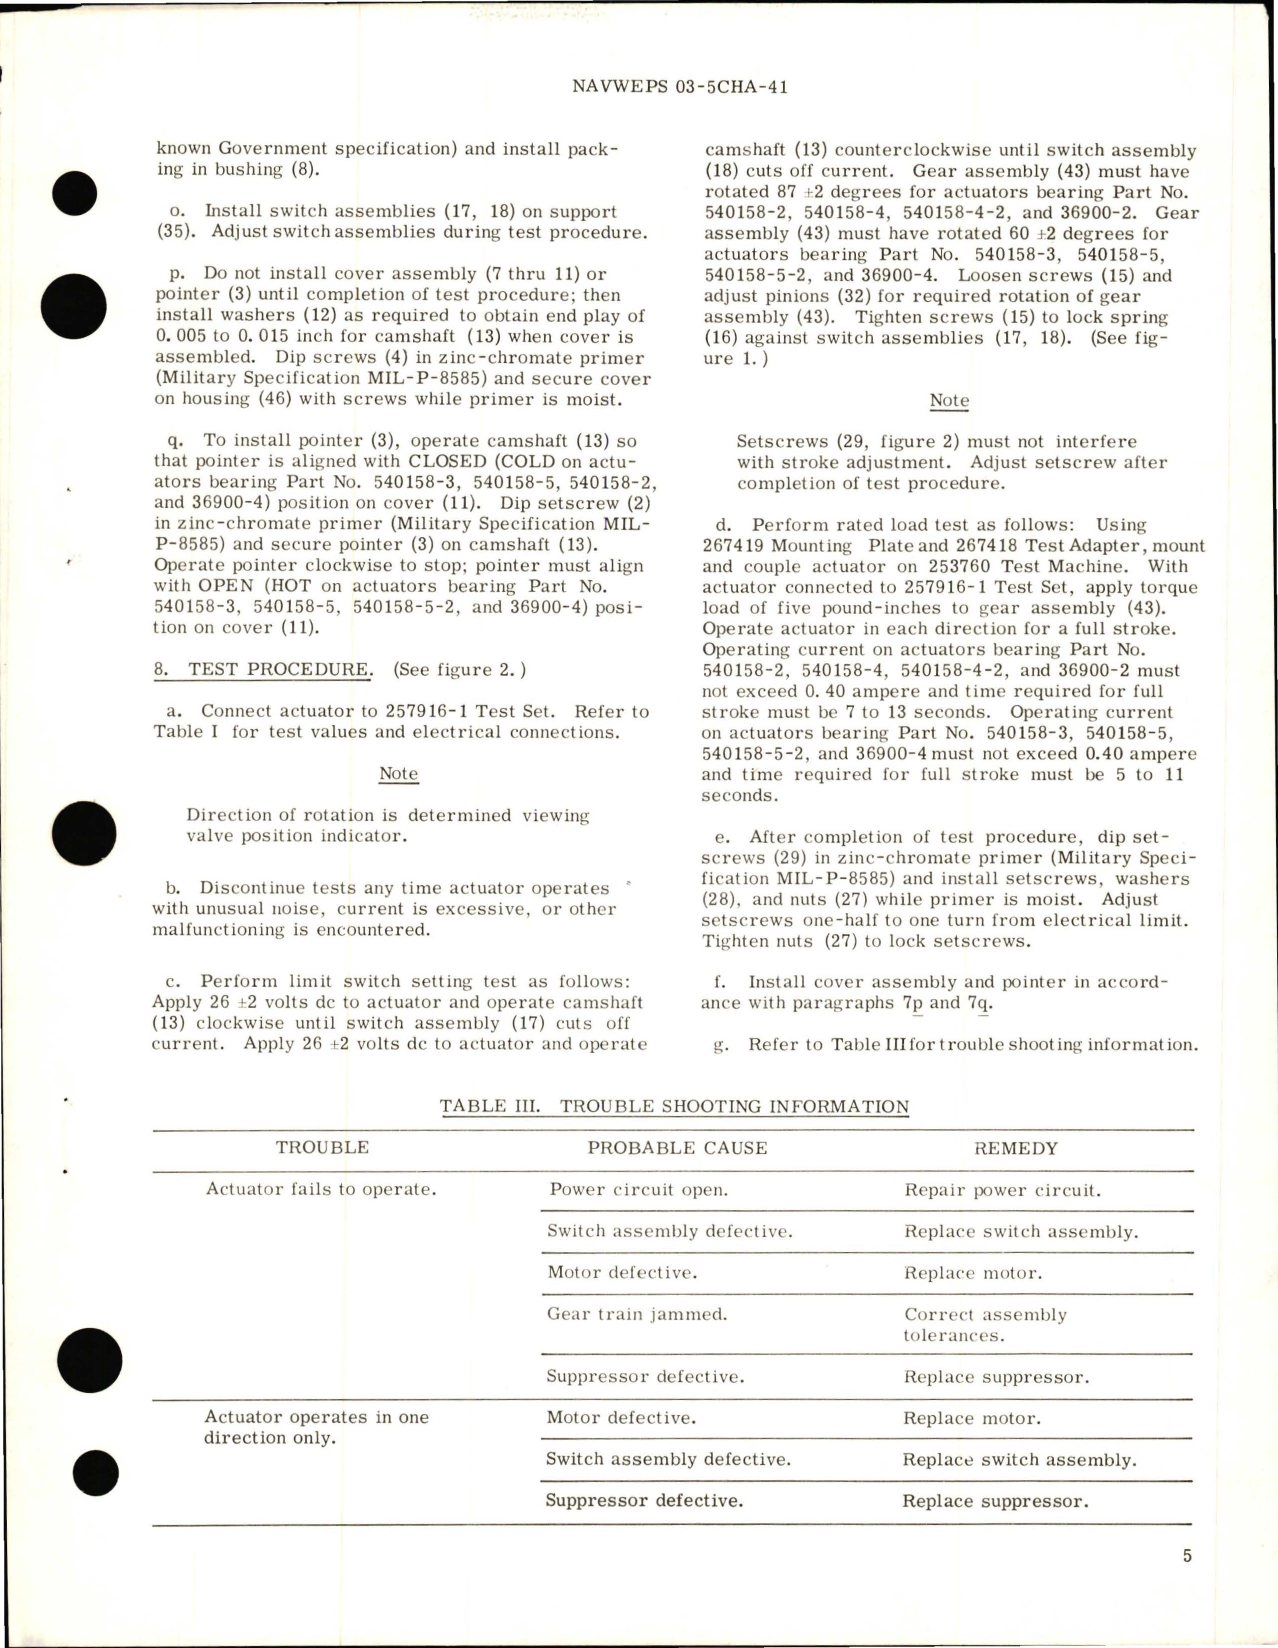 Sample page 5 from AirCorps Library document: Overhaul Instructions with Parts Breakdown for Rotary Electromechanical Actuators 